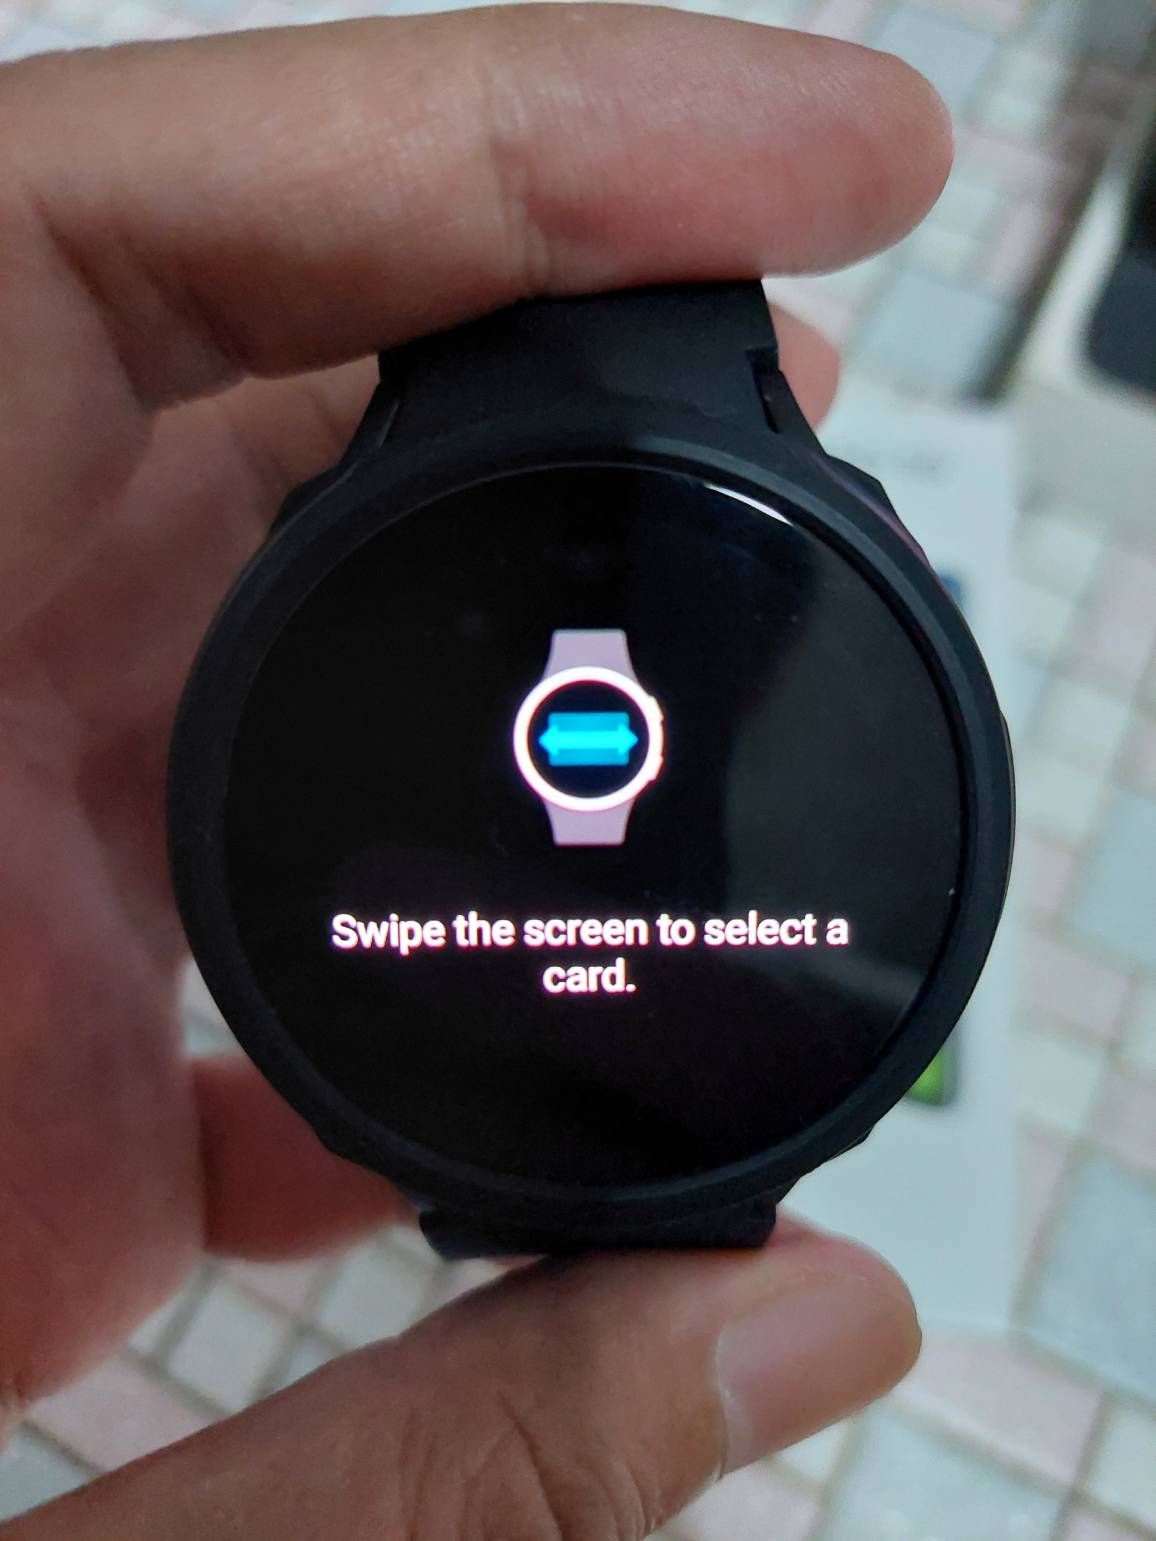 Galaxy Watch 4 - using as payment for bus/train ri... - Samsung Members